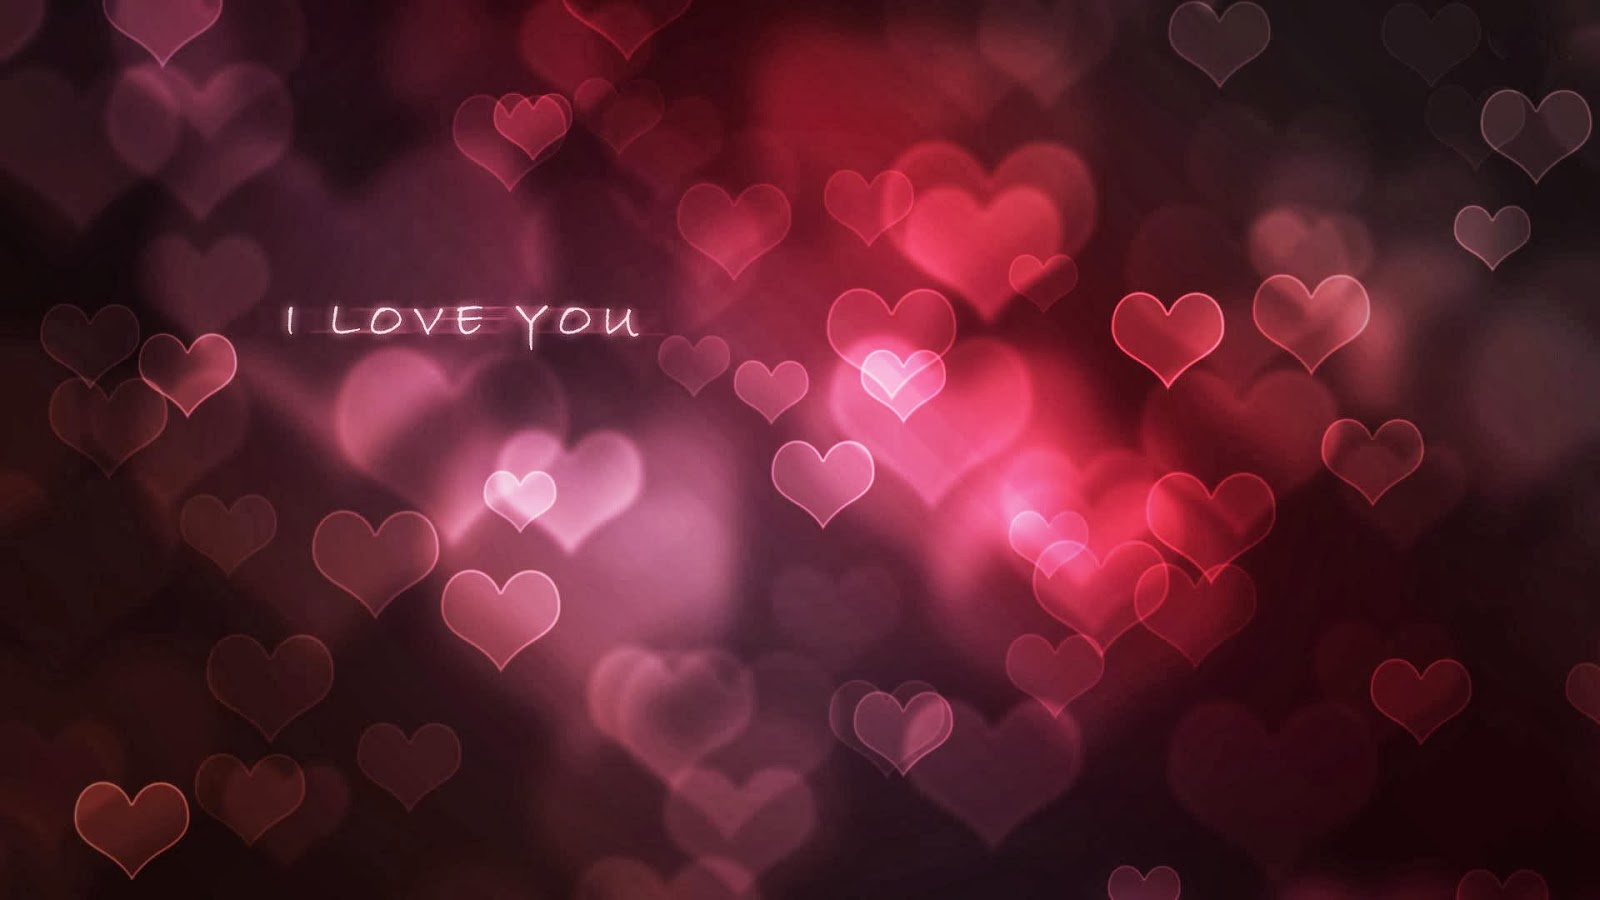 love wallpapers with messages,heart,pink,red,text,valentine's day